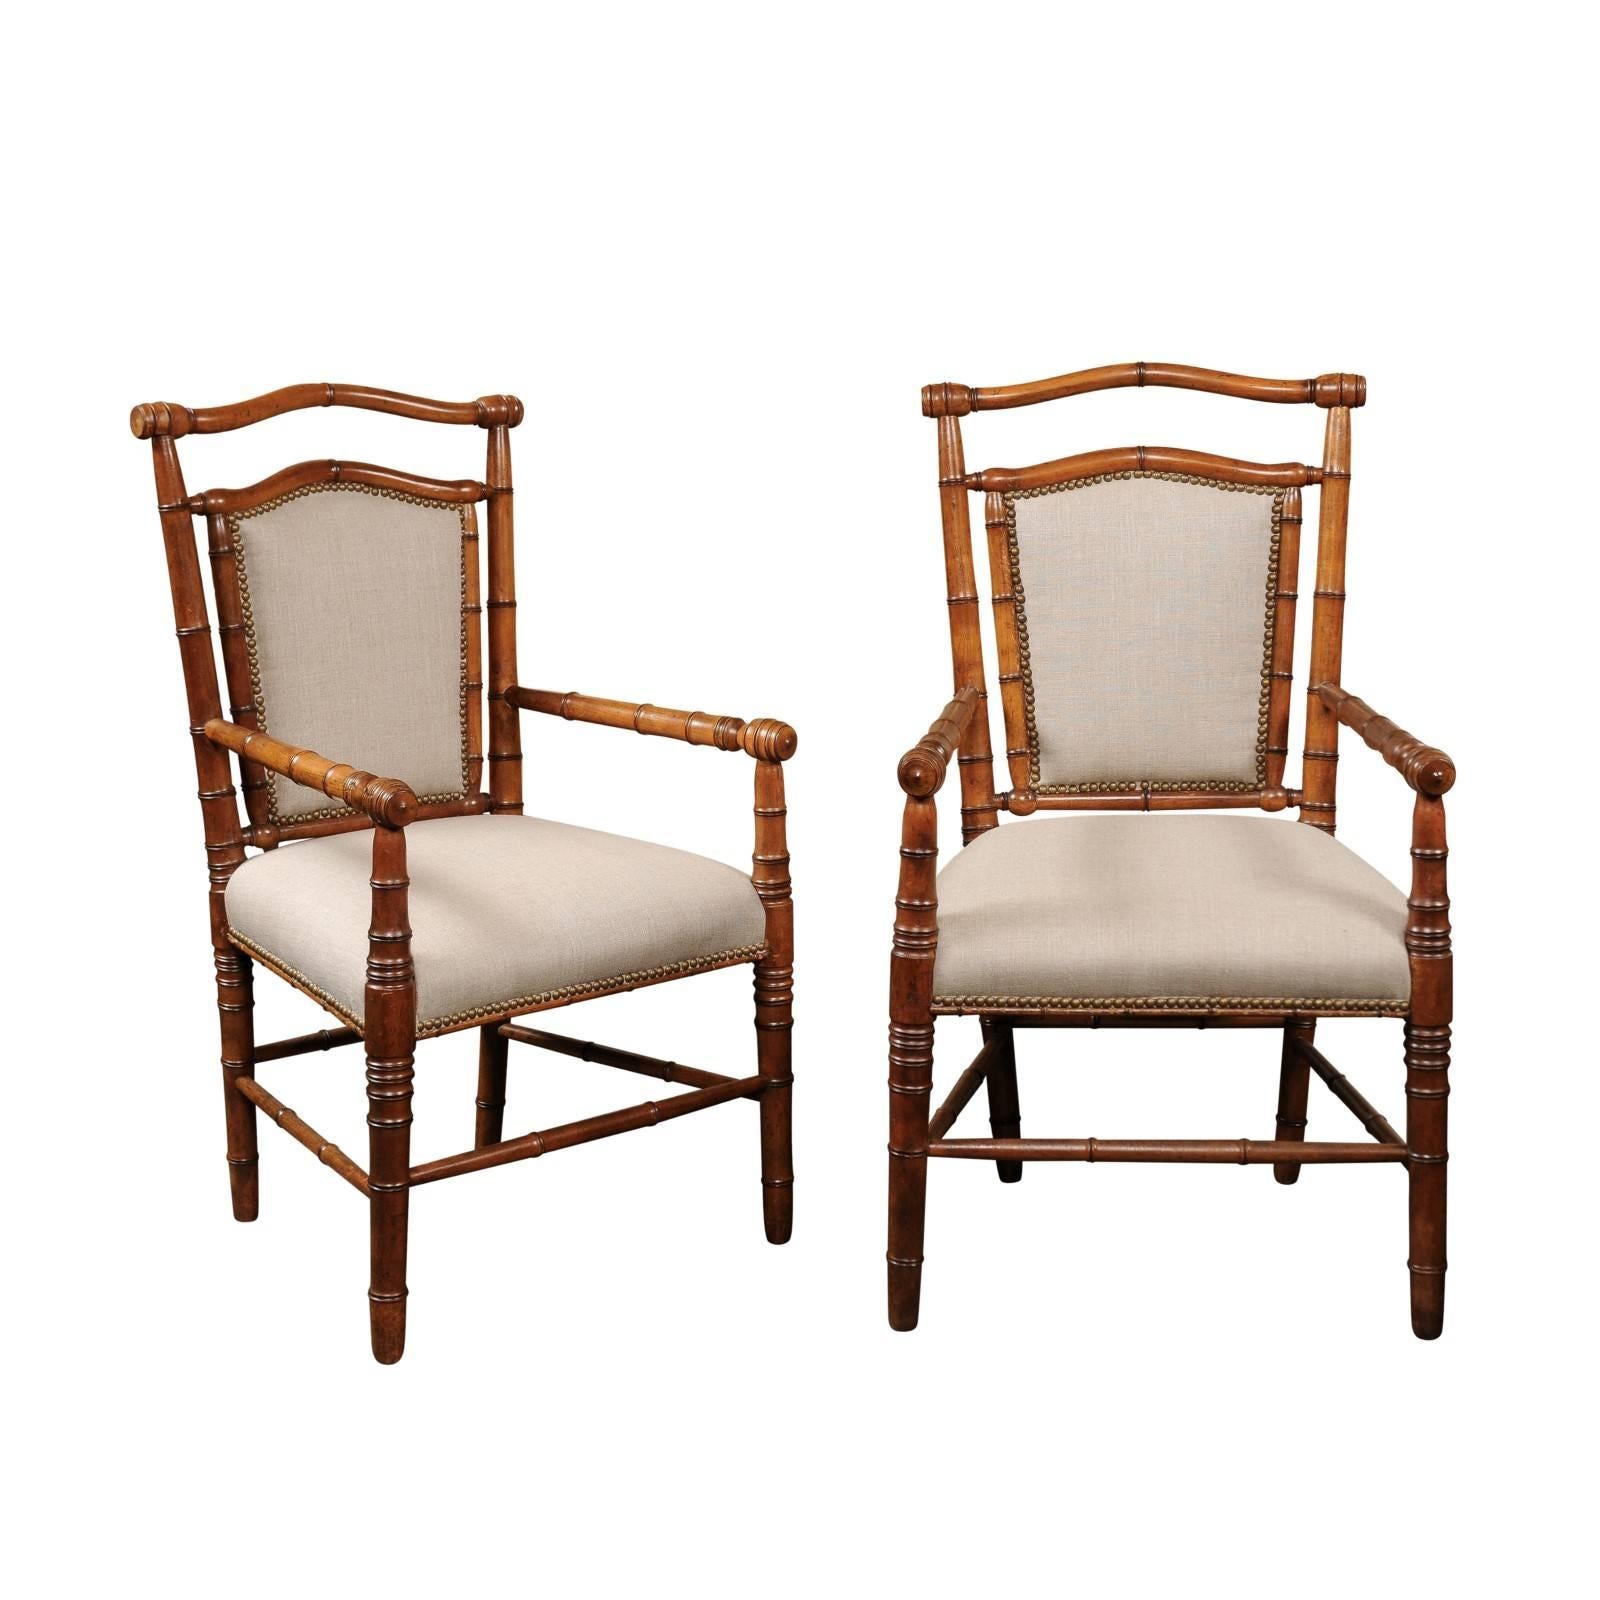 Pair of English 1900s Faux-Bamboo Armchairs with Turned Legs and Stretchers